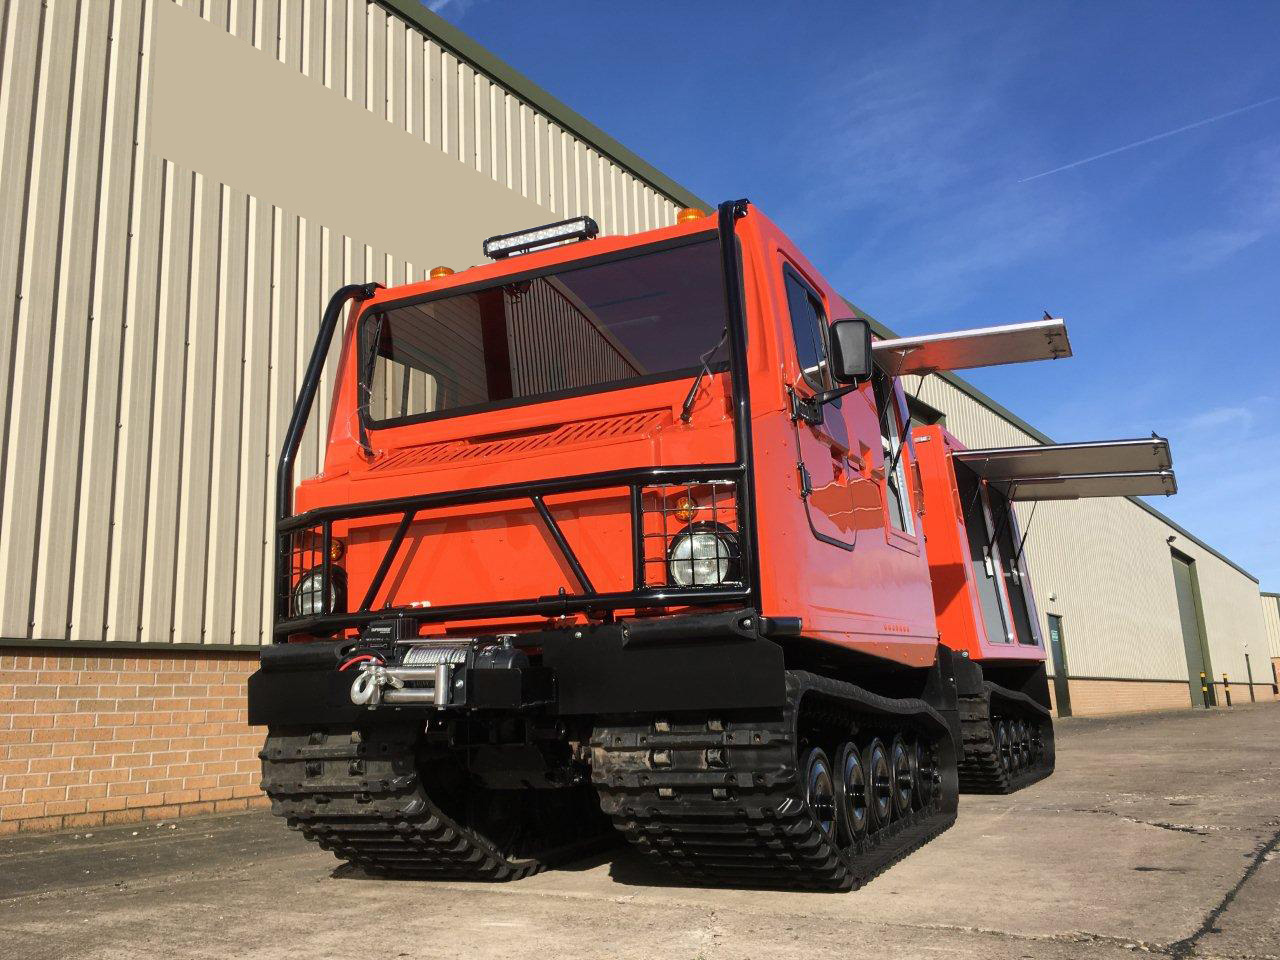 Hagglund BV206 Multi-Purpose Vehicle - Govsales of mod surplus ex army trucks, ex army land rovers and other military vehicles for sale